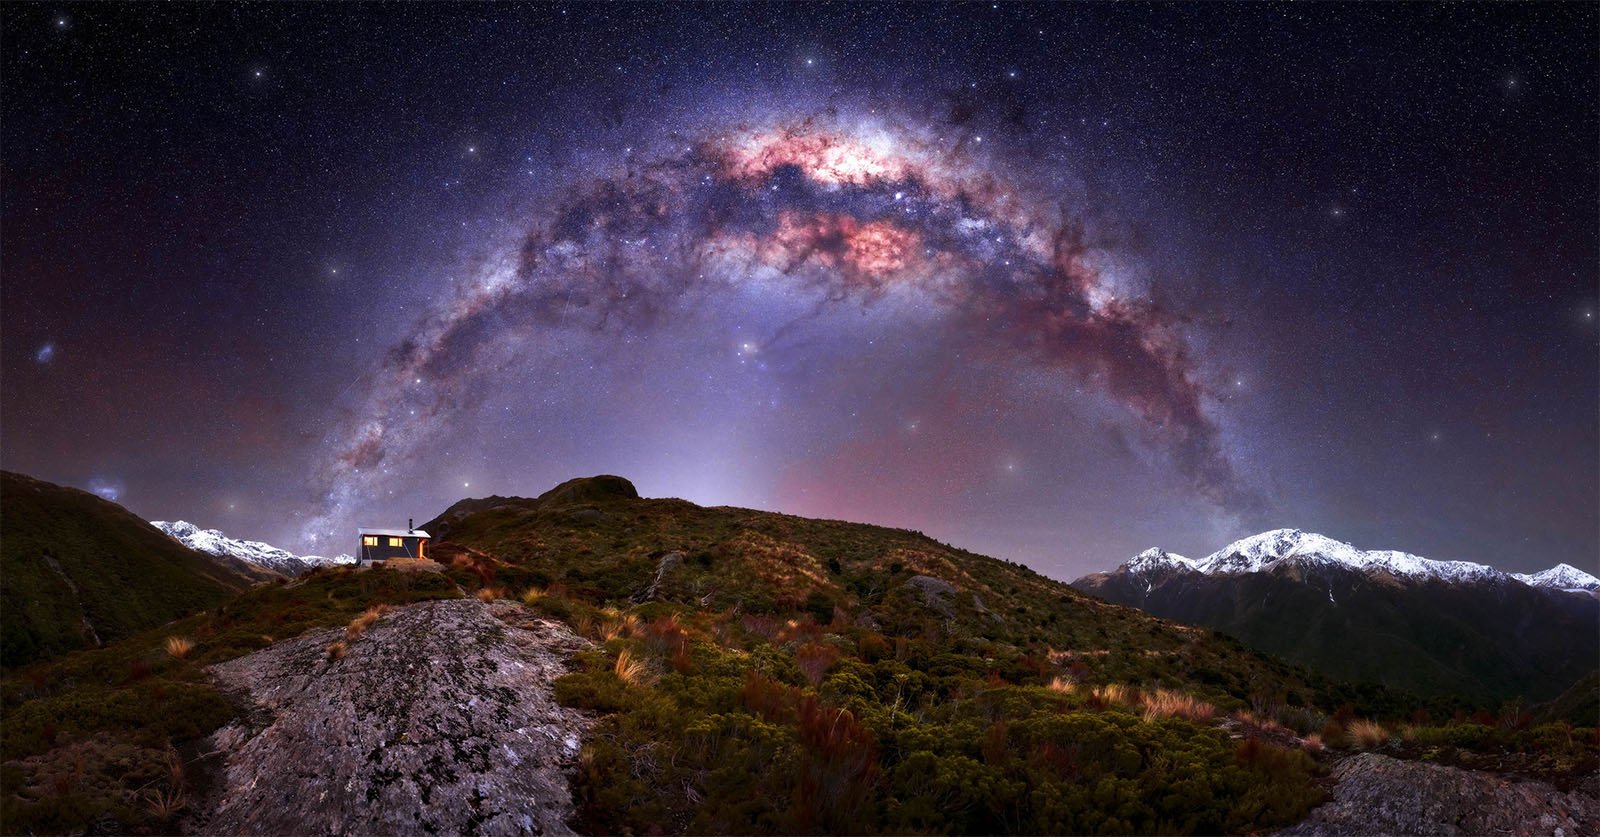 A panoramic view of a starry night sky with the Milky Way arching over rugged, snow-capped mountains. A solitary house with a light on is nestled on a hill in the foreground, surrounded by shrubbery and rocky terrain. The scene conveys tranquility and natural beauty.